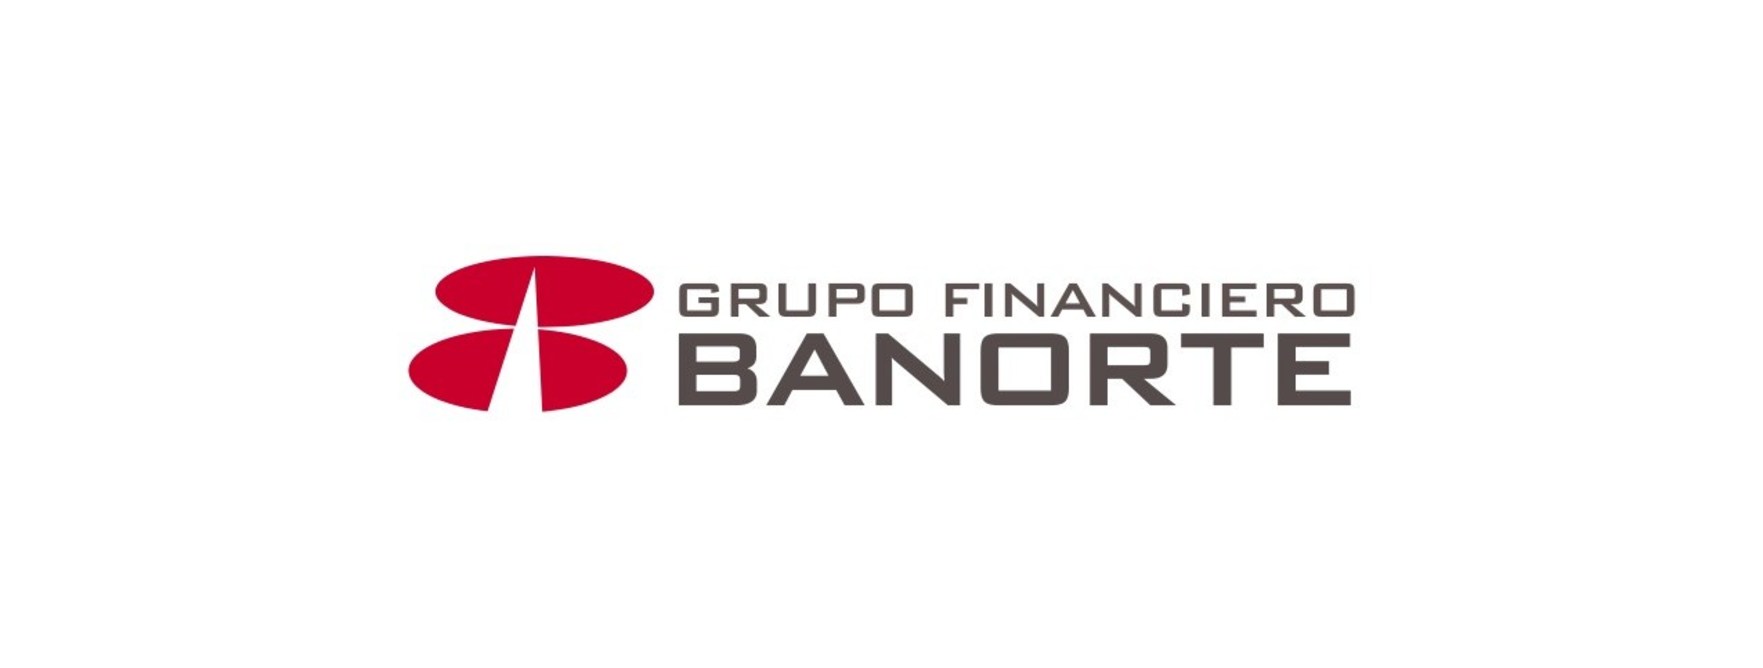 Chairman Carlos Hank González: Banorte named 'Bank of the Year' in Mexico